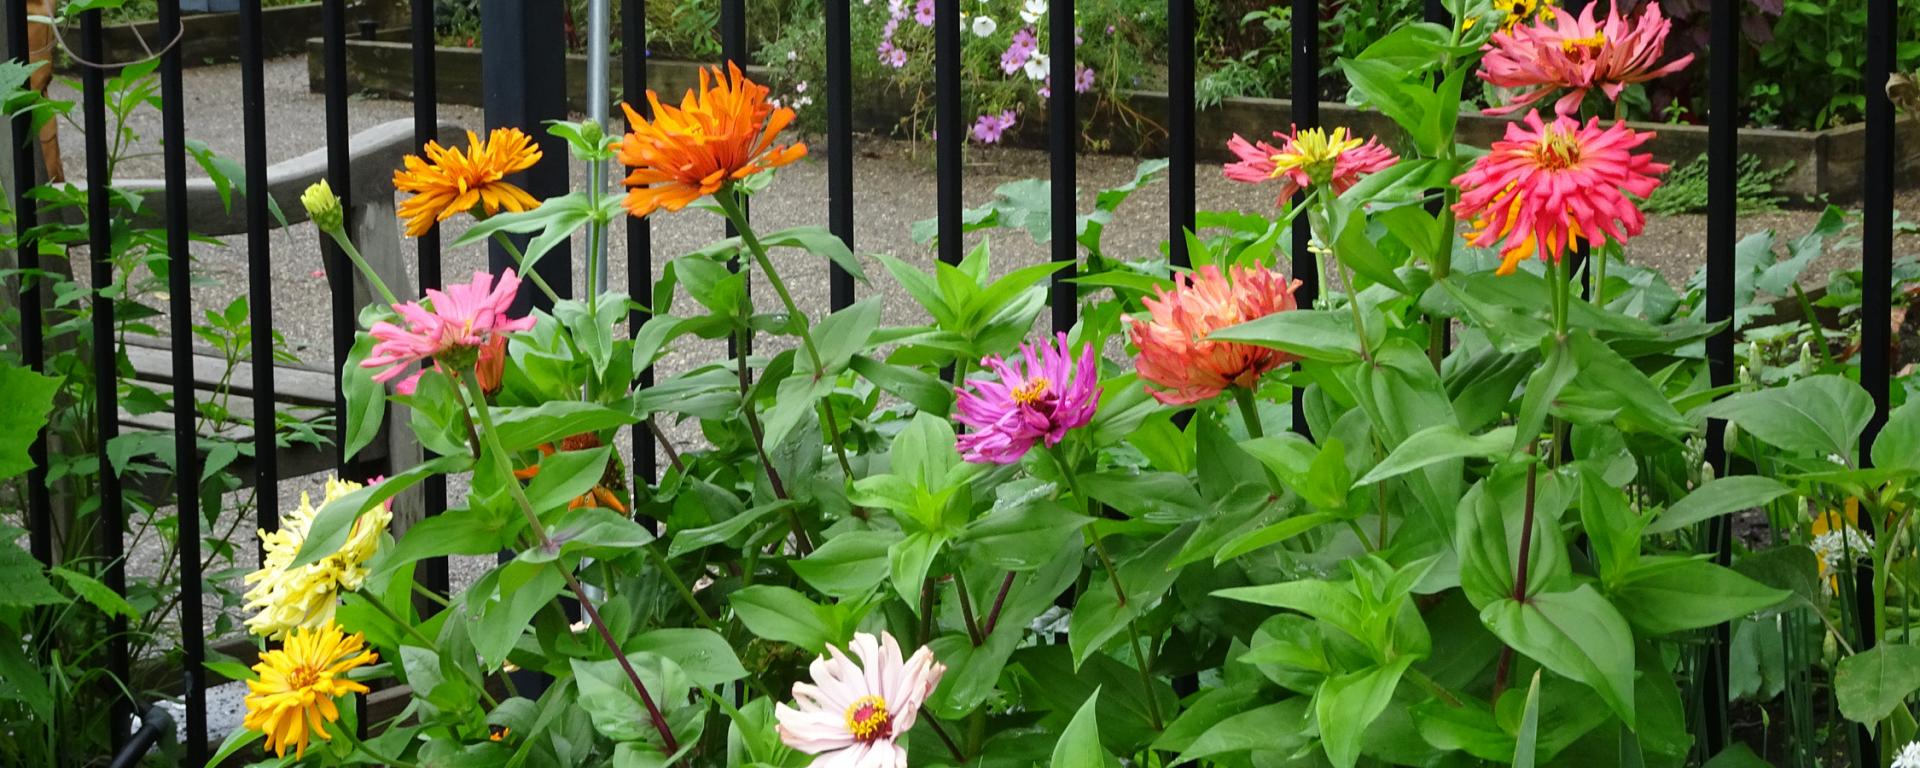 colorful flowers by a fence